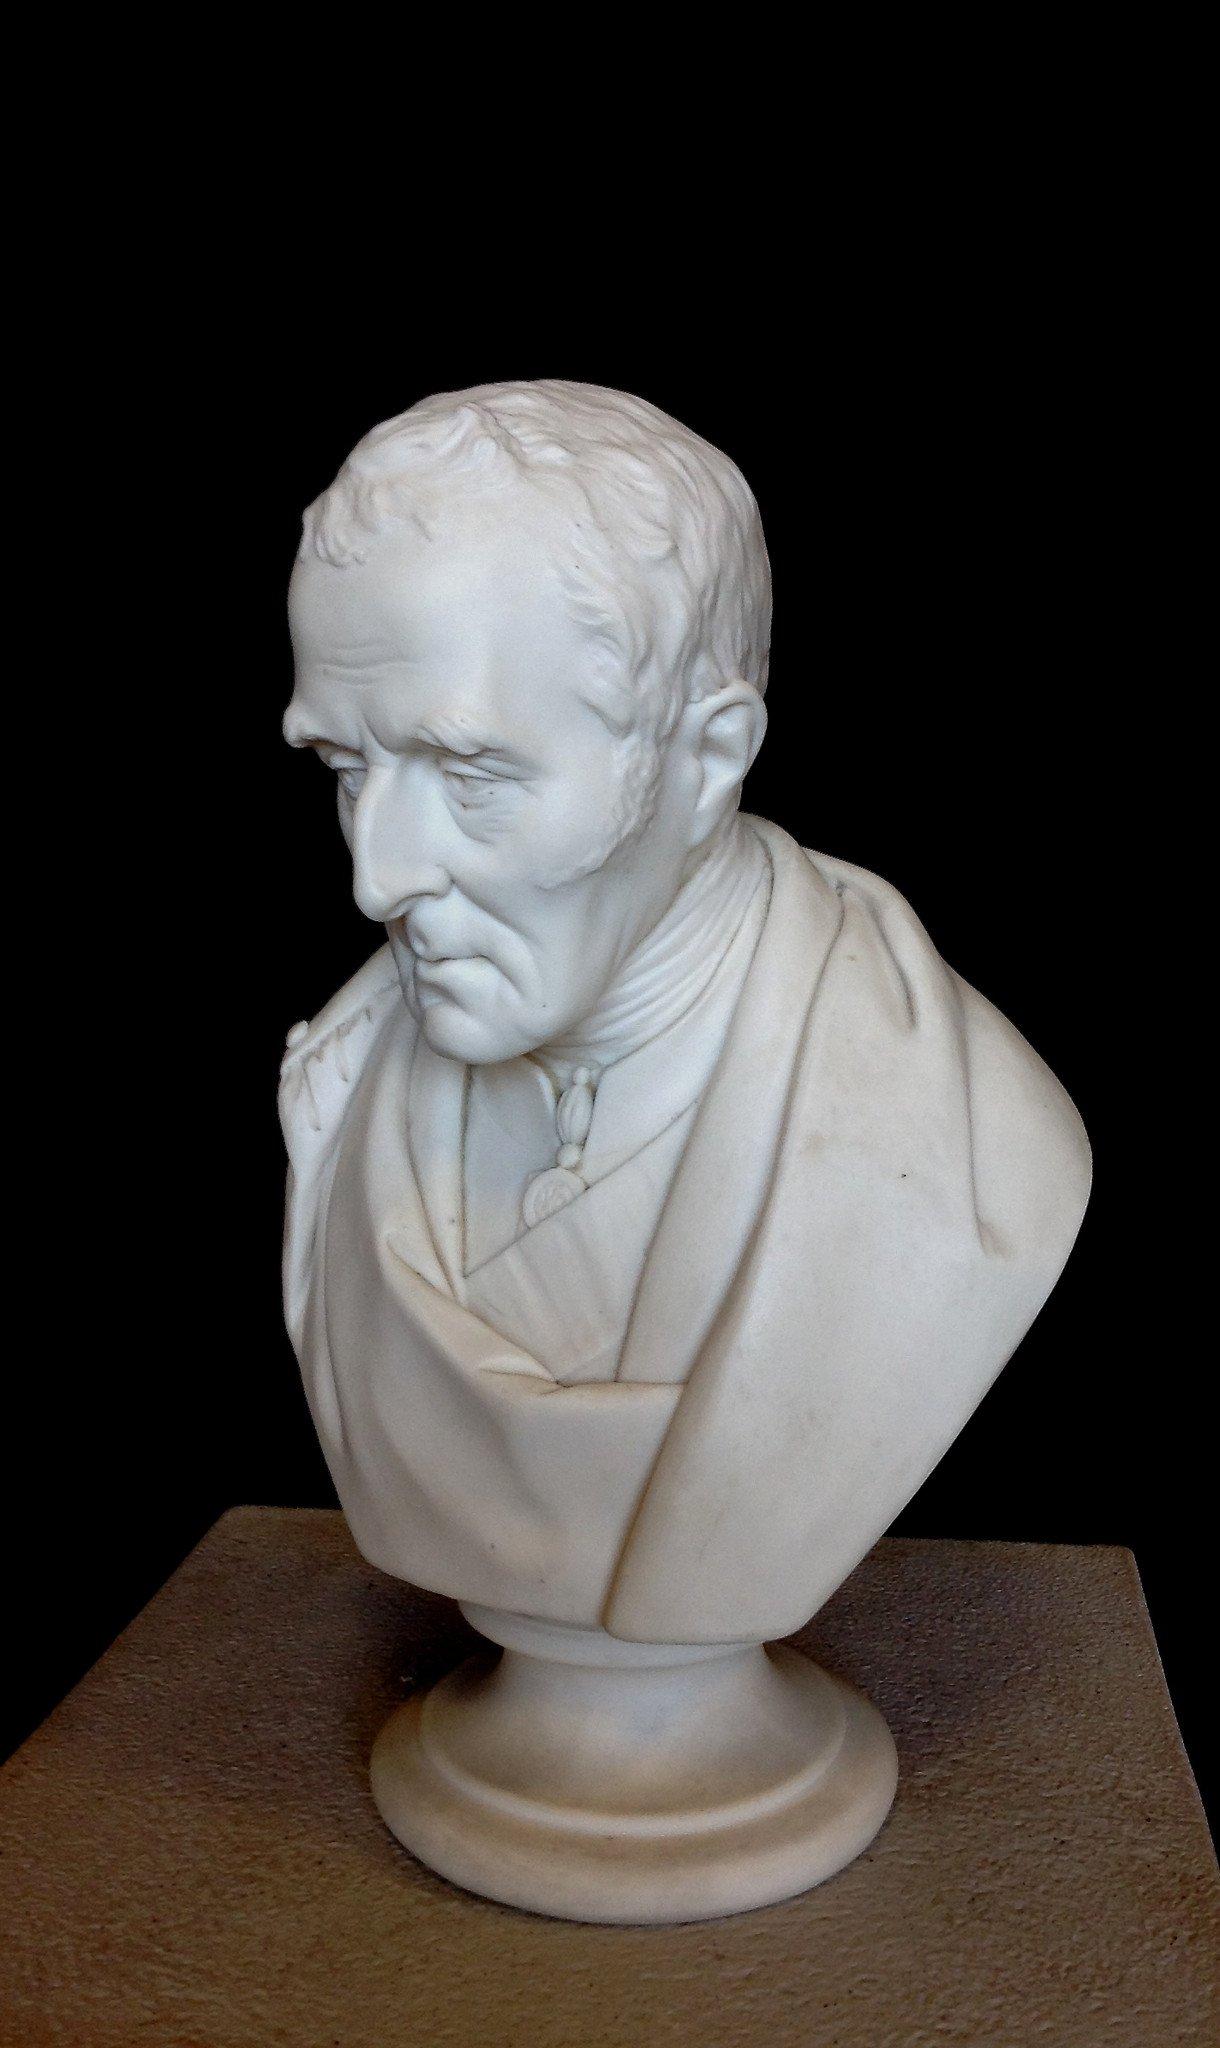 A gorgeous Duke of Wellington marble bust, 20th century. 
Duke of Wellington, by Joseph Pitts, 1852.

A very finely detailed marble portrait Bust of Wellington, by one of the leading British Victorian portrait artists.

Pitts exhibited at the